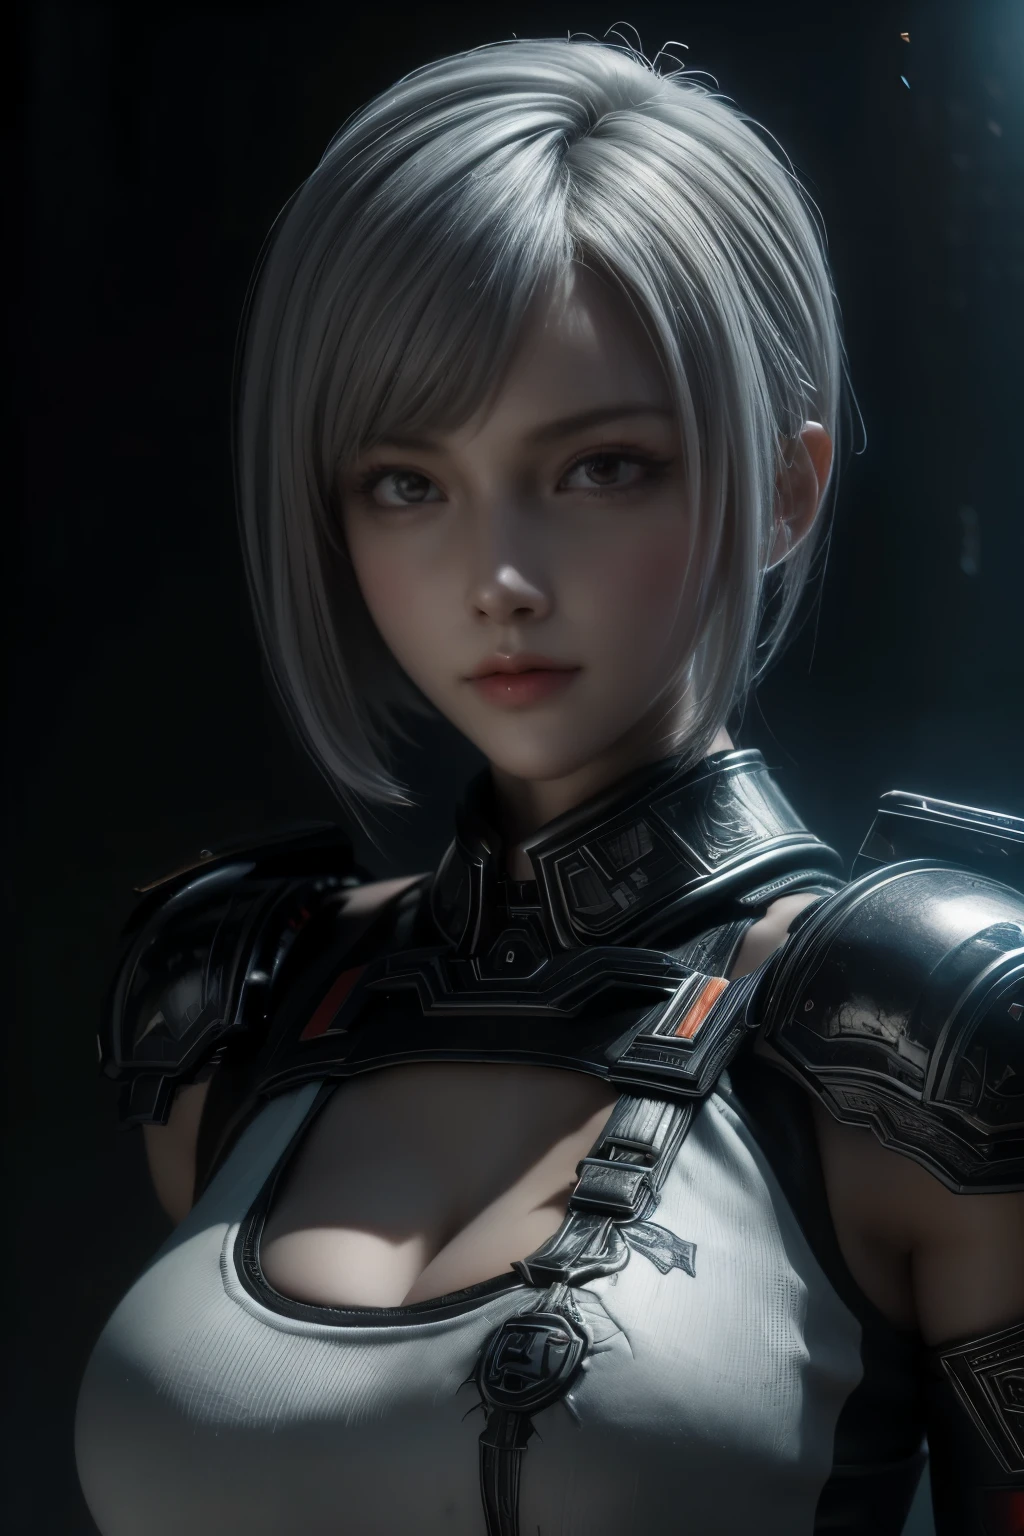 Masterpiece,Game art,The best picture quality,Highest resolution,8K,(Portrait),Unreal Engine 5 rendering works,(Digital Photography),((Portrait Feature:1.5)),
20 year old girl,Short hair details,With long bangs,(The red eye makeup is very meticulous),(White with short hair:1.4),(Large, full breasts),Elegant and noble,Brave and charming,
(Future armor combined with the characteristics of ancient Chinese armor,Hollow design,Power Armor,The mysterious Eastern runes,A delicate dress pattern,A flash of magic),Warrior of the future,Cyberpunk figures,Background of war,
Movie lights，Ray tracing，Game CG，((3D Unreal Engine))，OC rendering reflection pattern